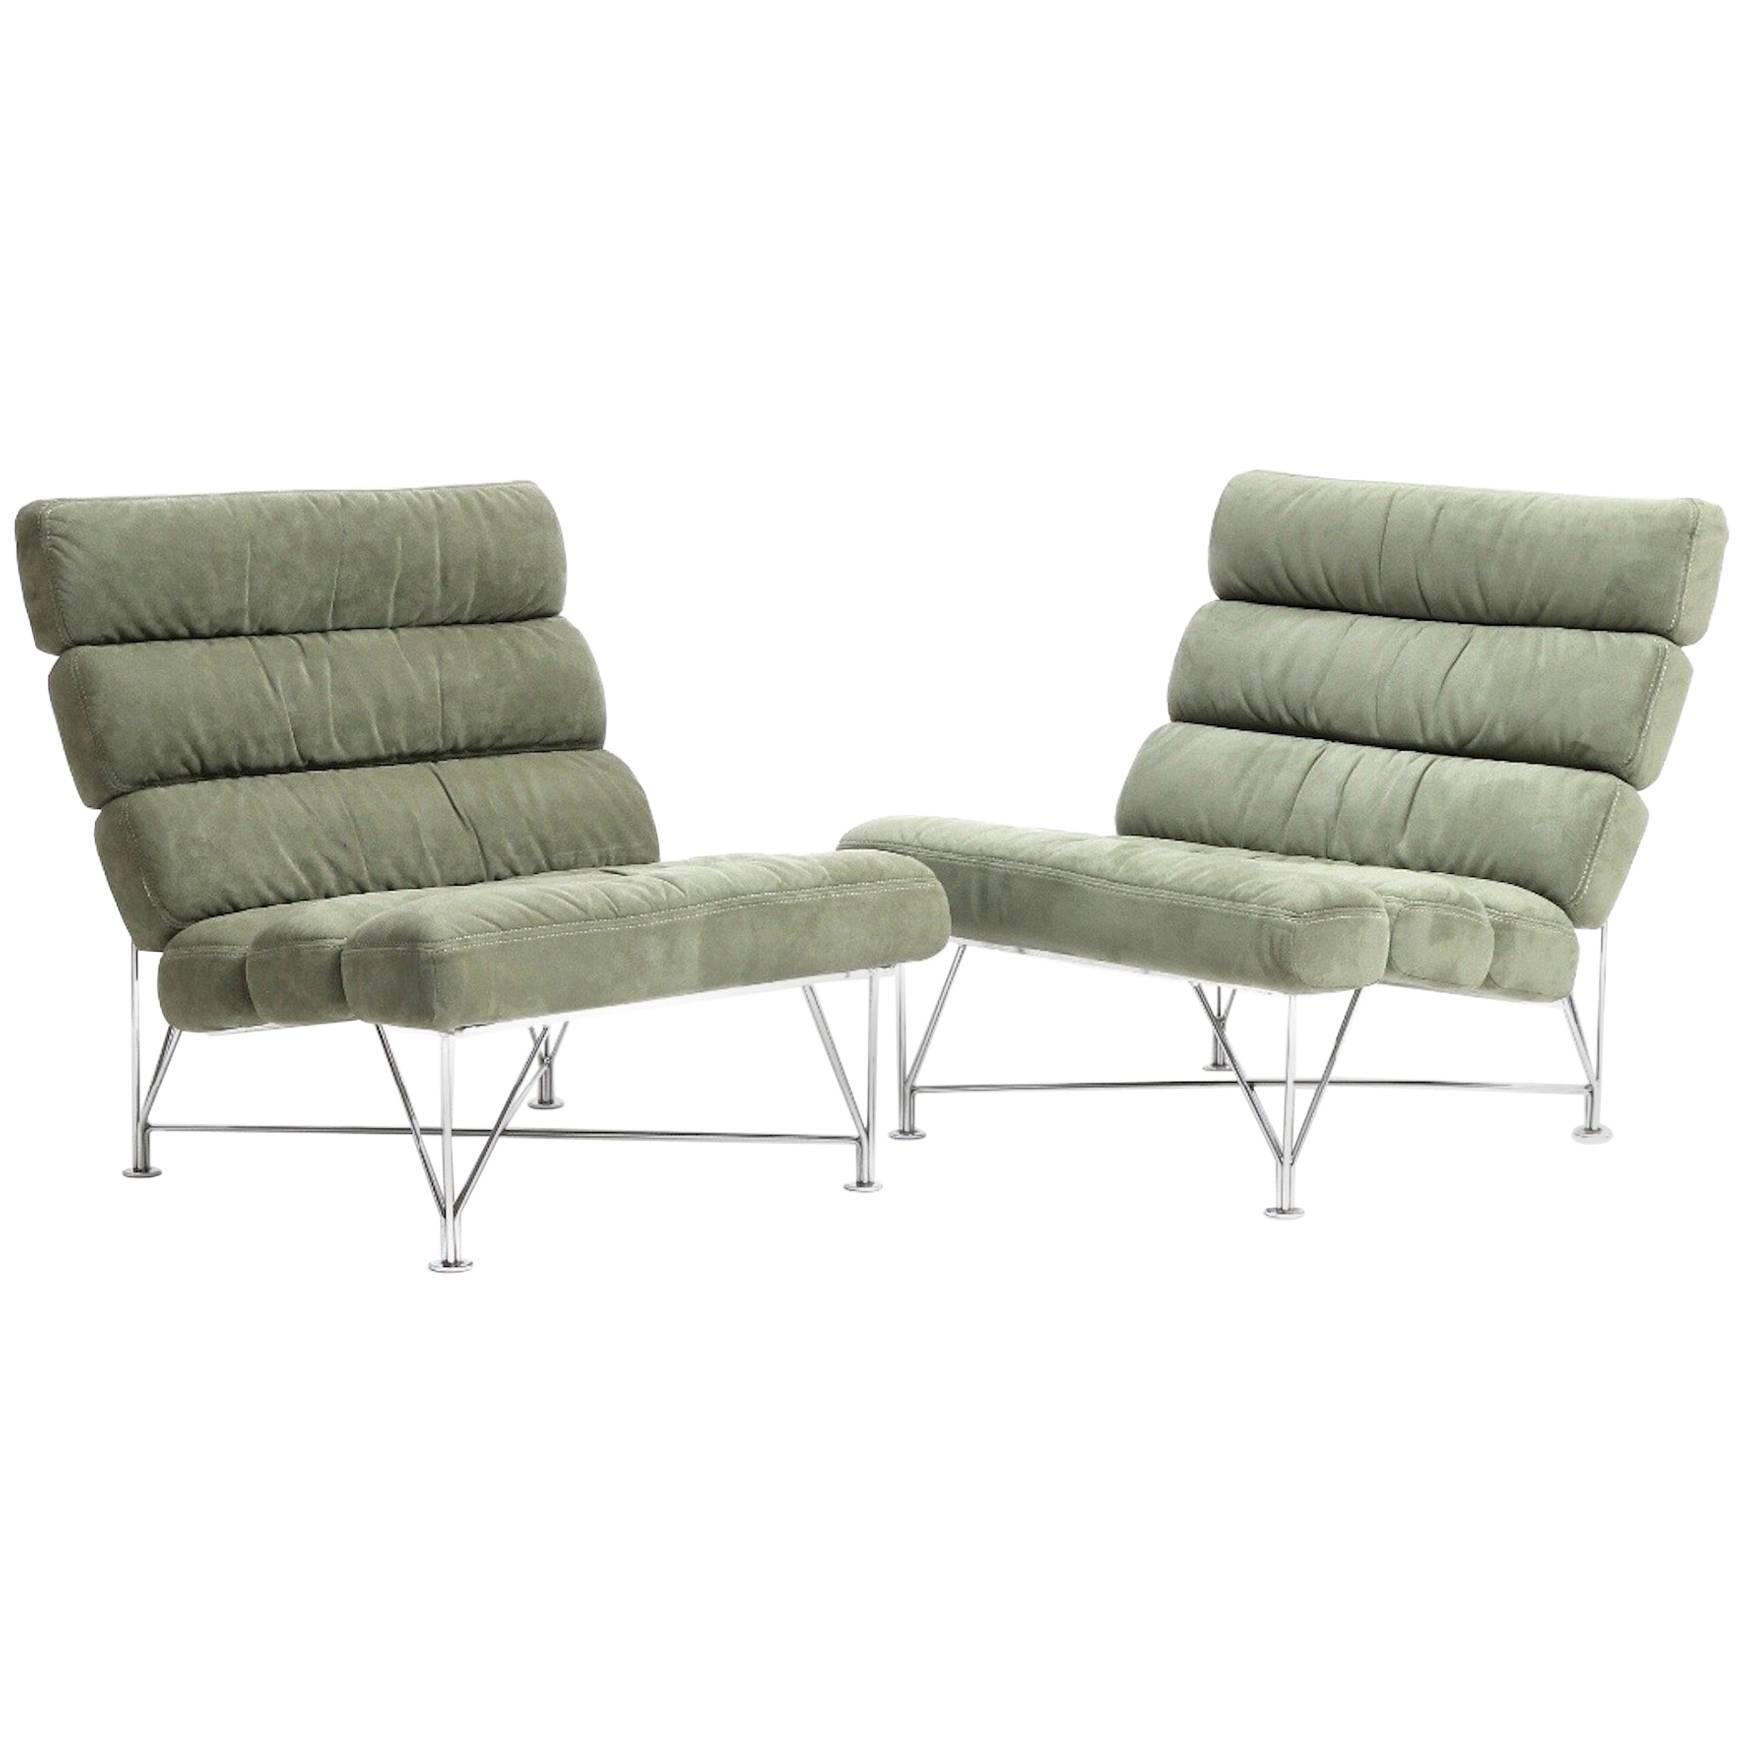 Nice Pair of Spider Lounge Chairs by DUX